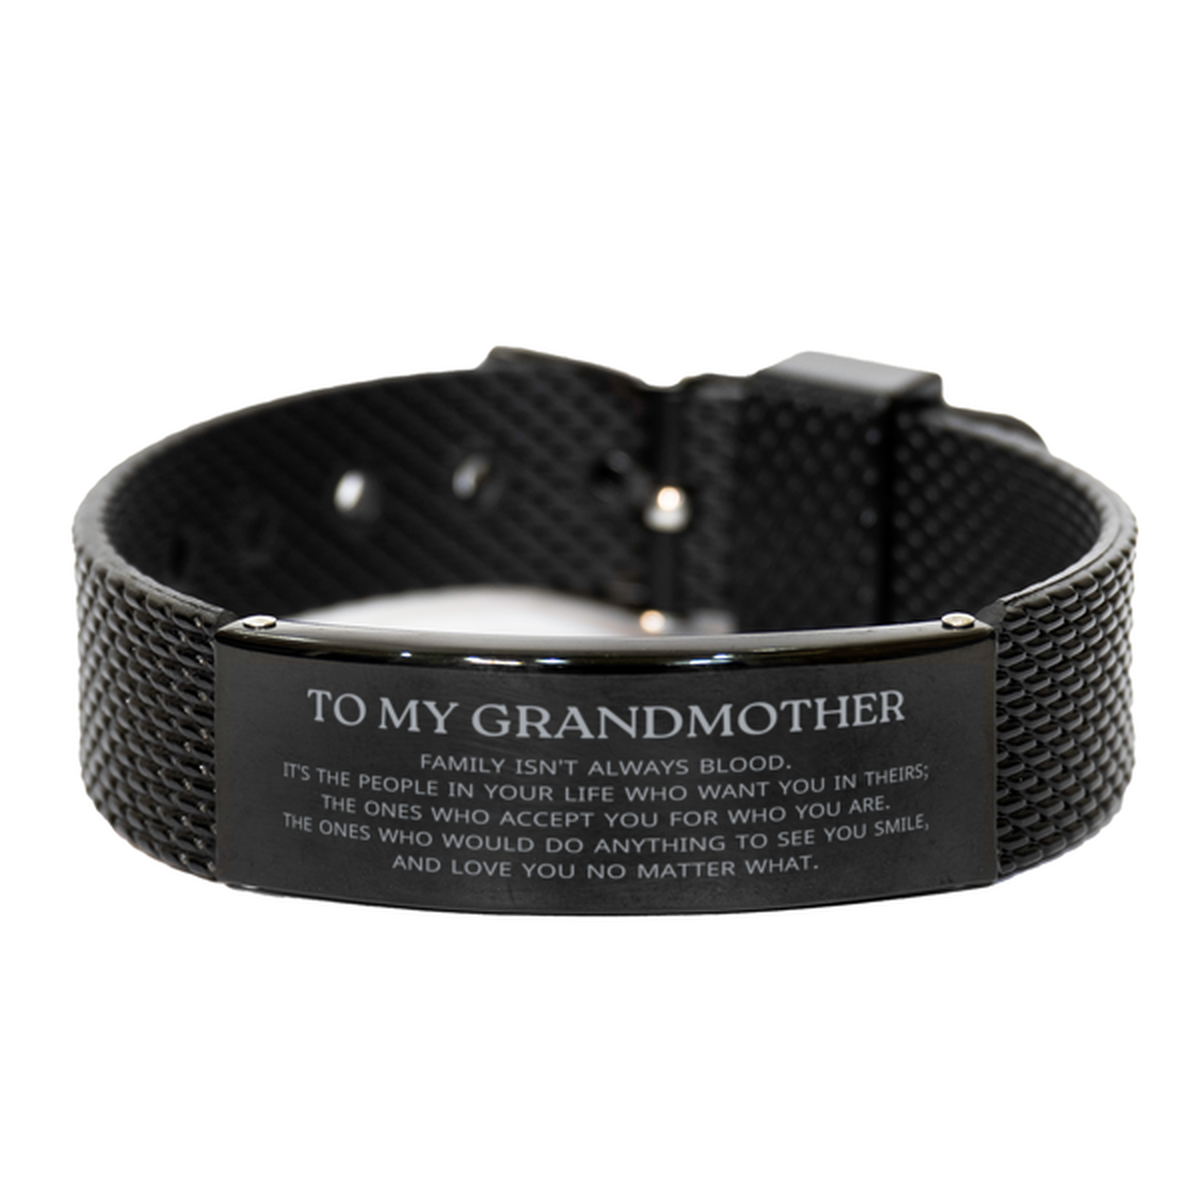 To My Grandmother Gifts, Family isn't always blood, Grandmother Black Shark Mesh Bracelet, Birthday Christmas Unique Present For Grandmother